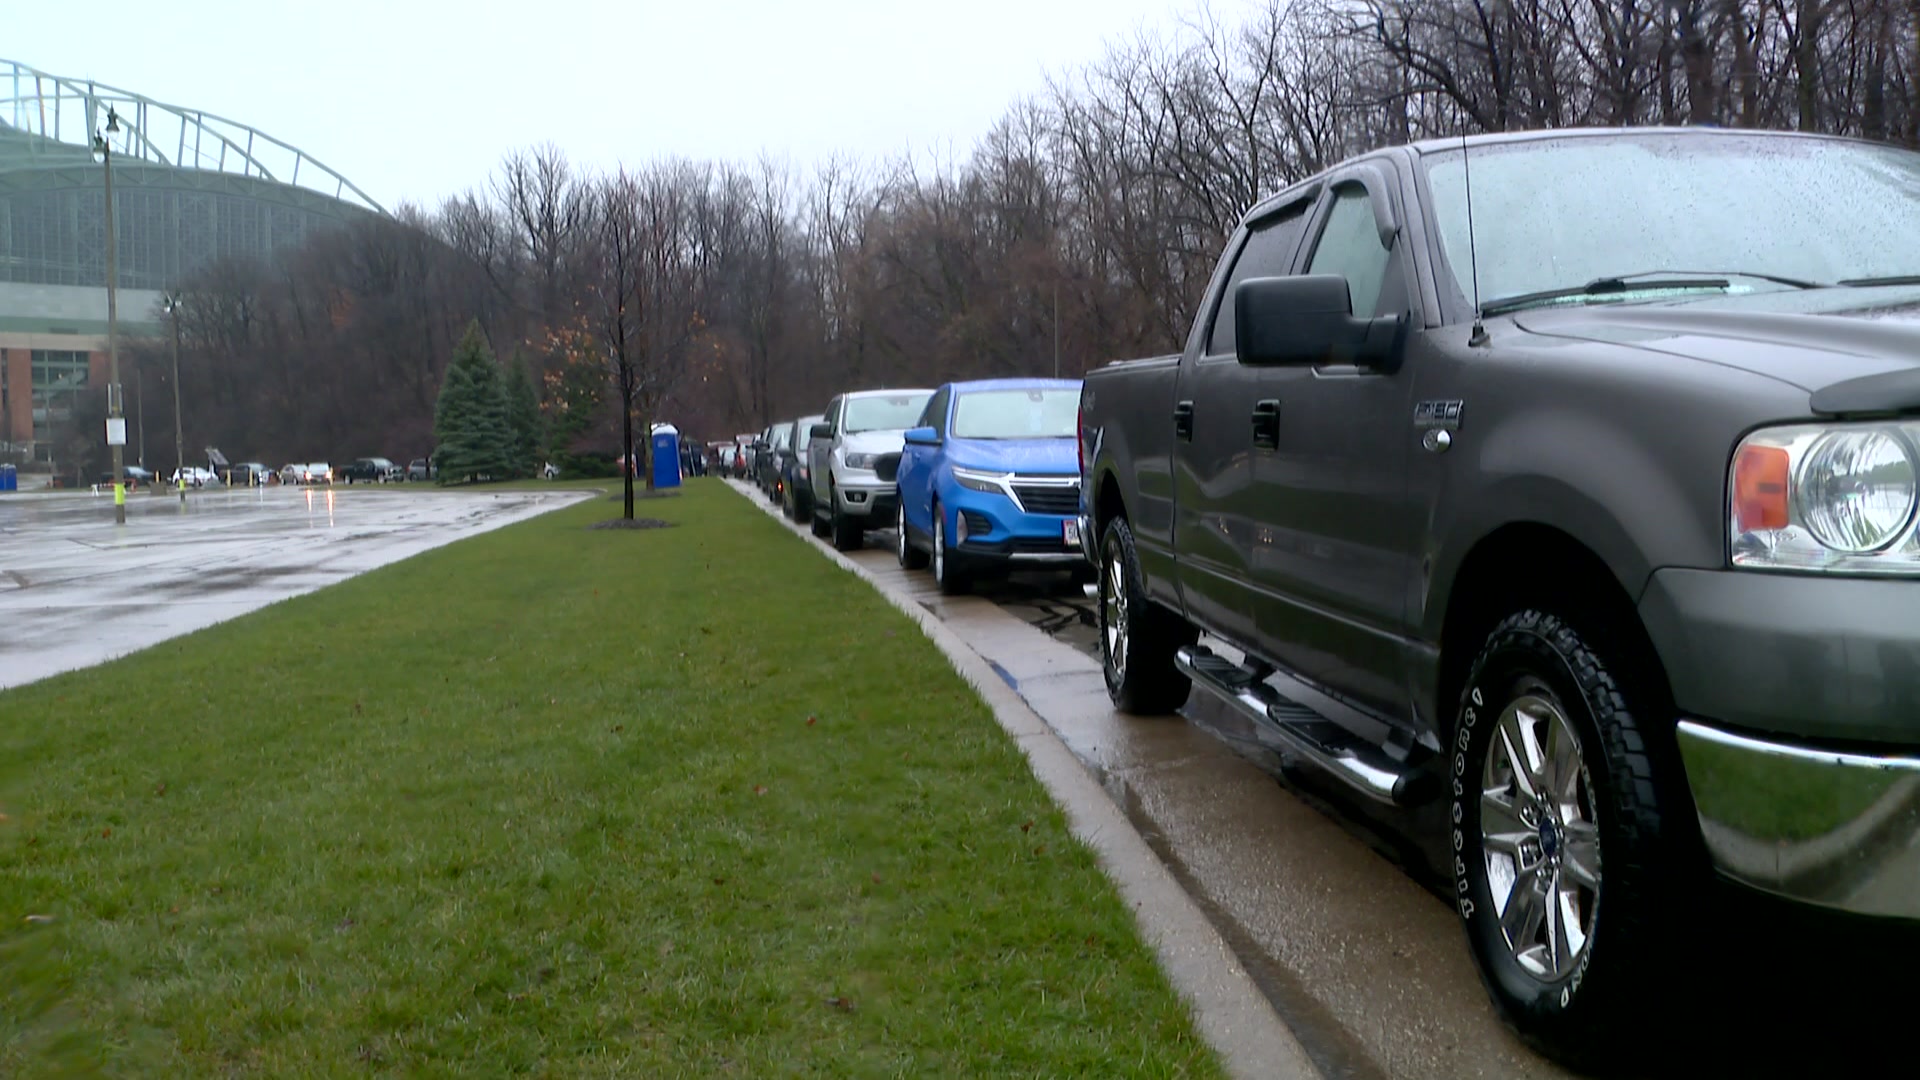 AmFam Field to return to traditional parking process while new technology problems are fixed